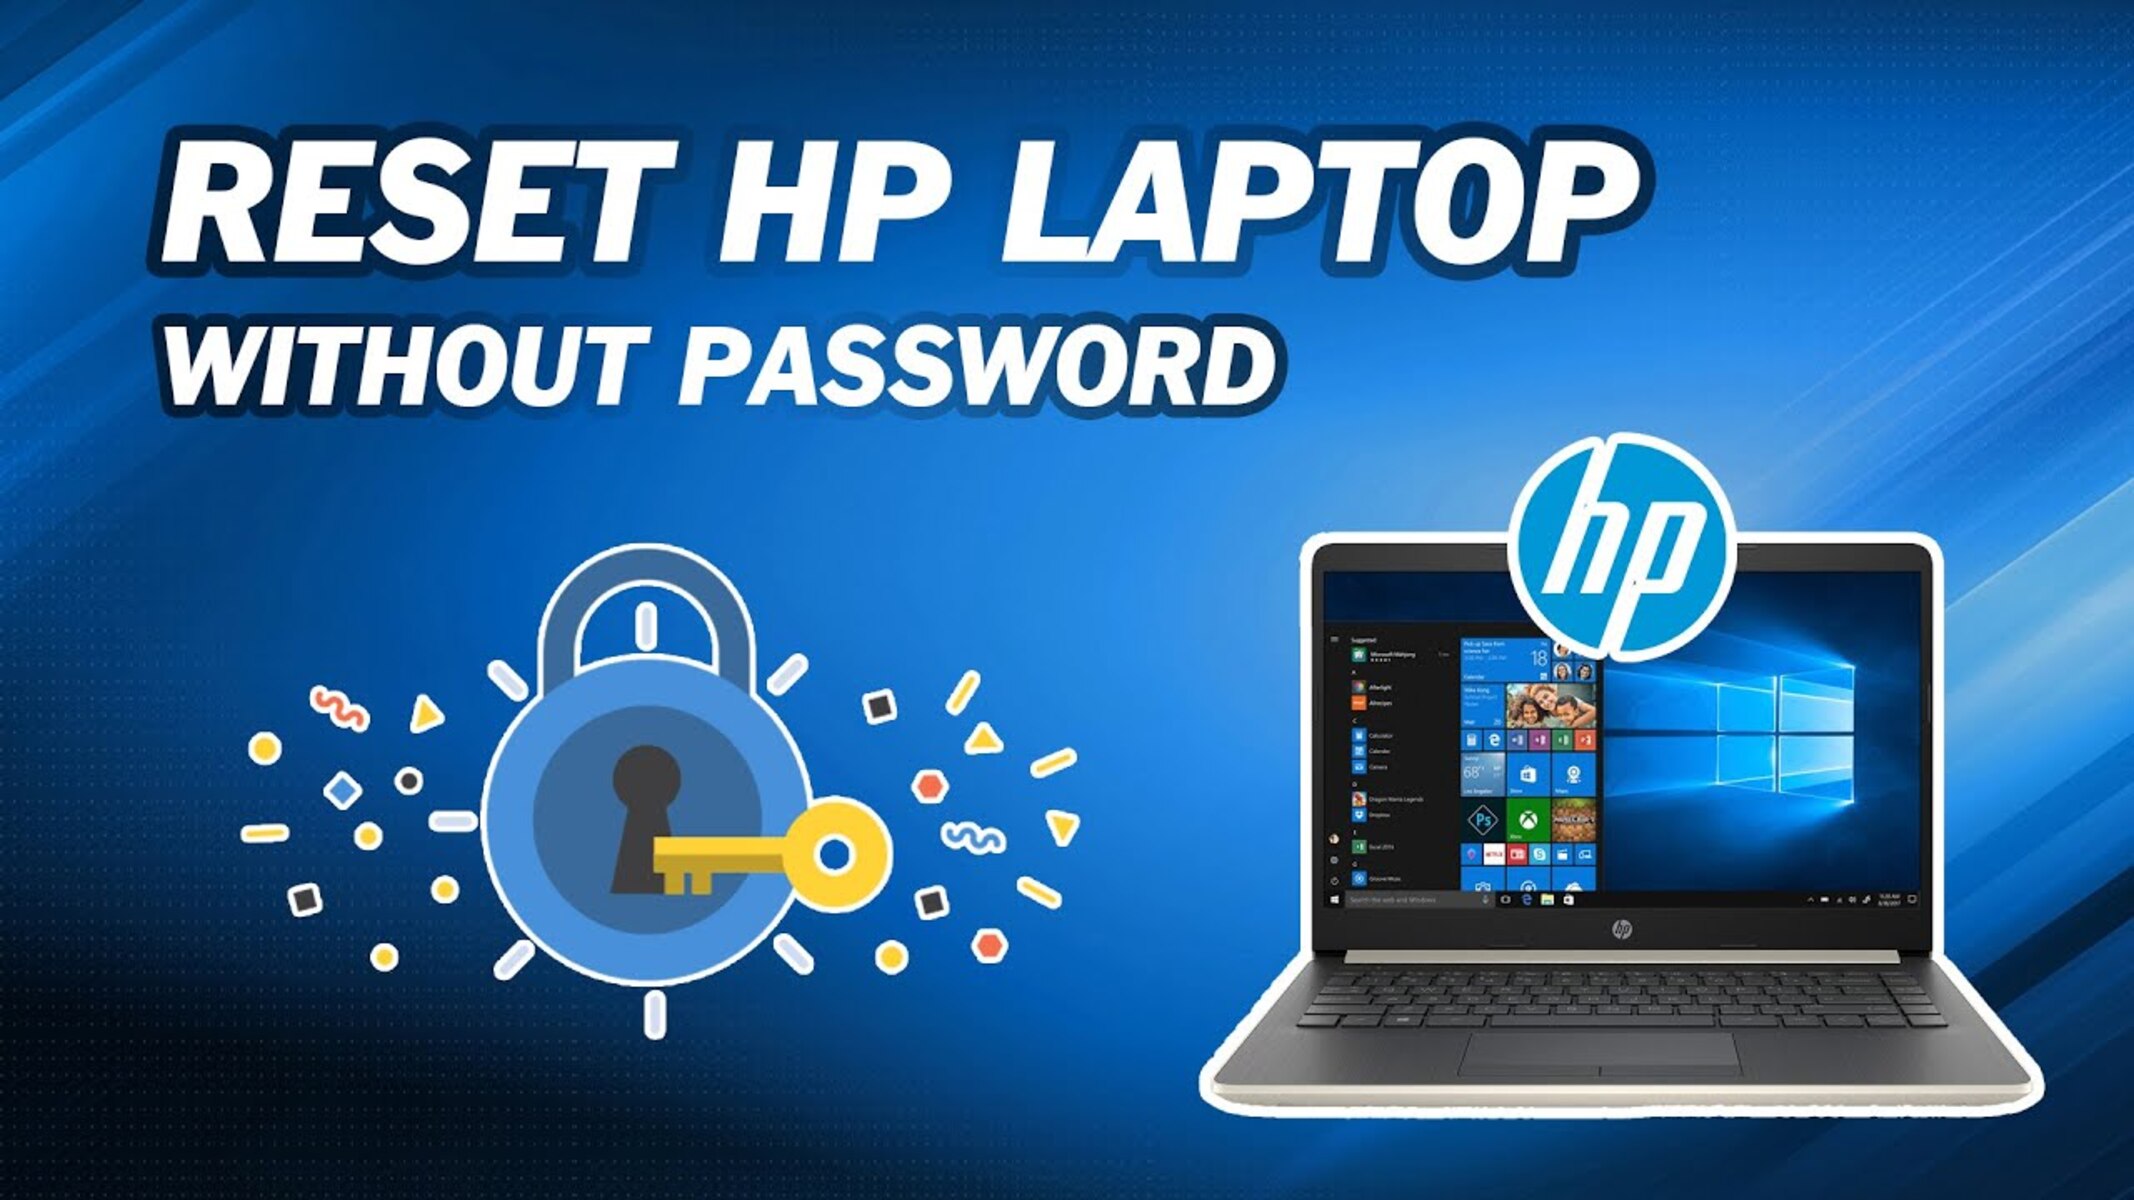 How To Perform A Factory Reset On An HP Xw4400 Workstation